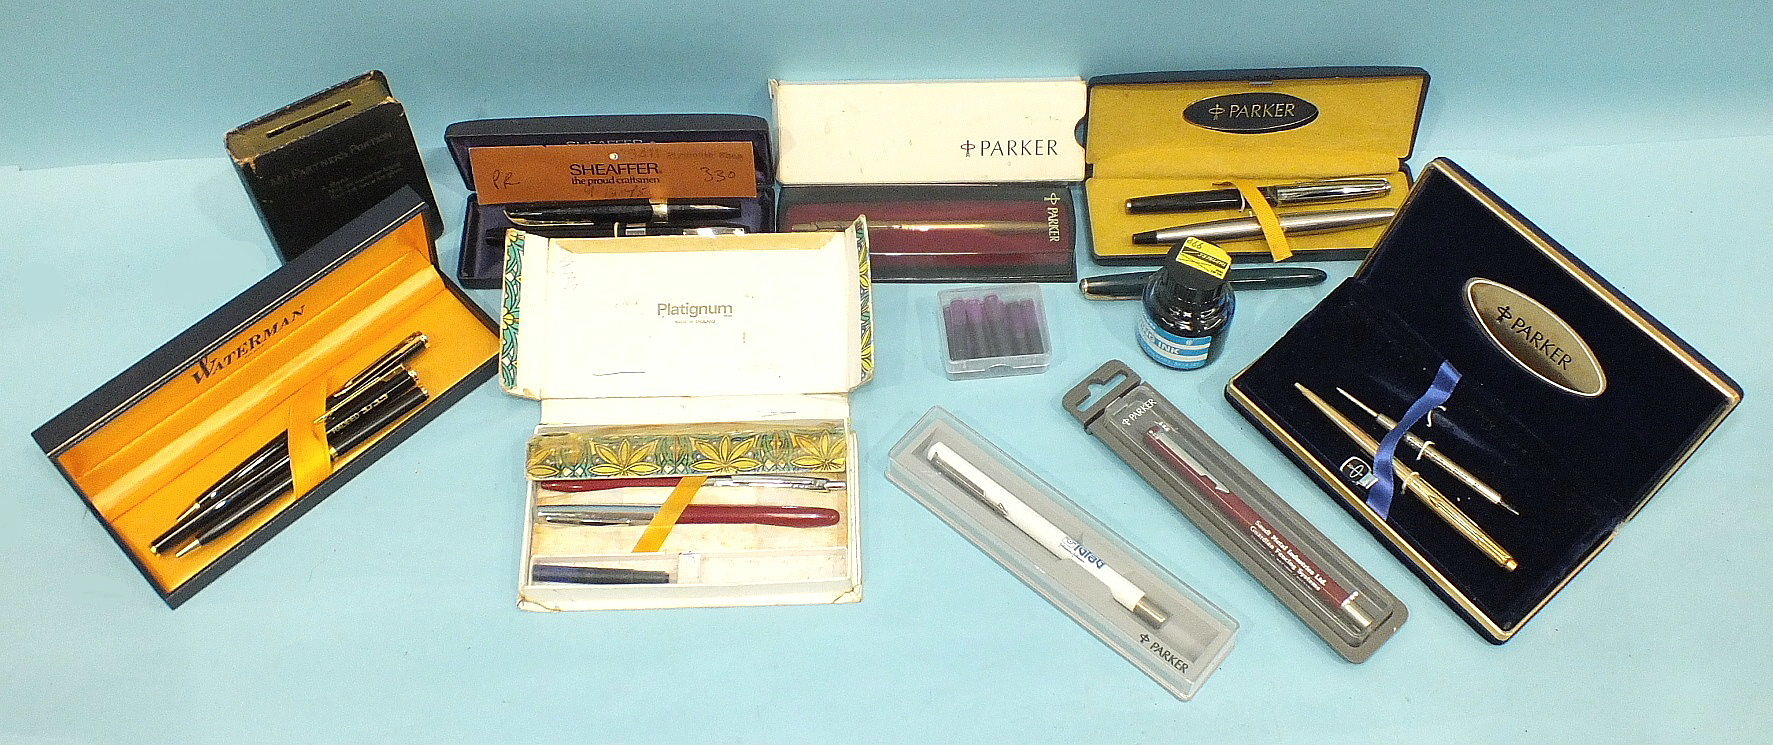 A small quantity of fountain and other pens, including Platinum, Parker, Sheaffer, Watermans, etc.